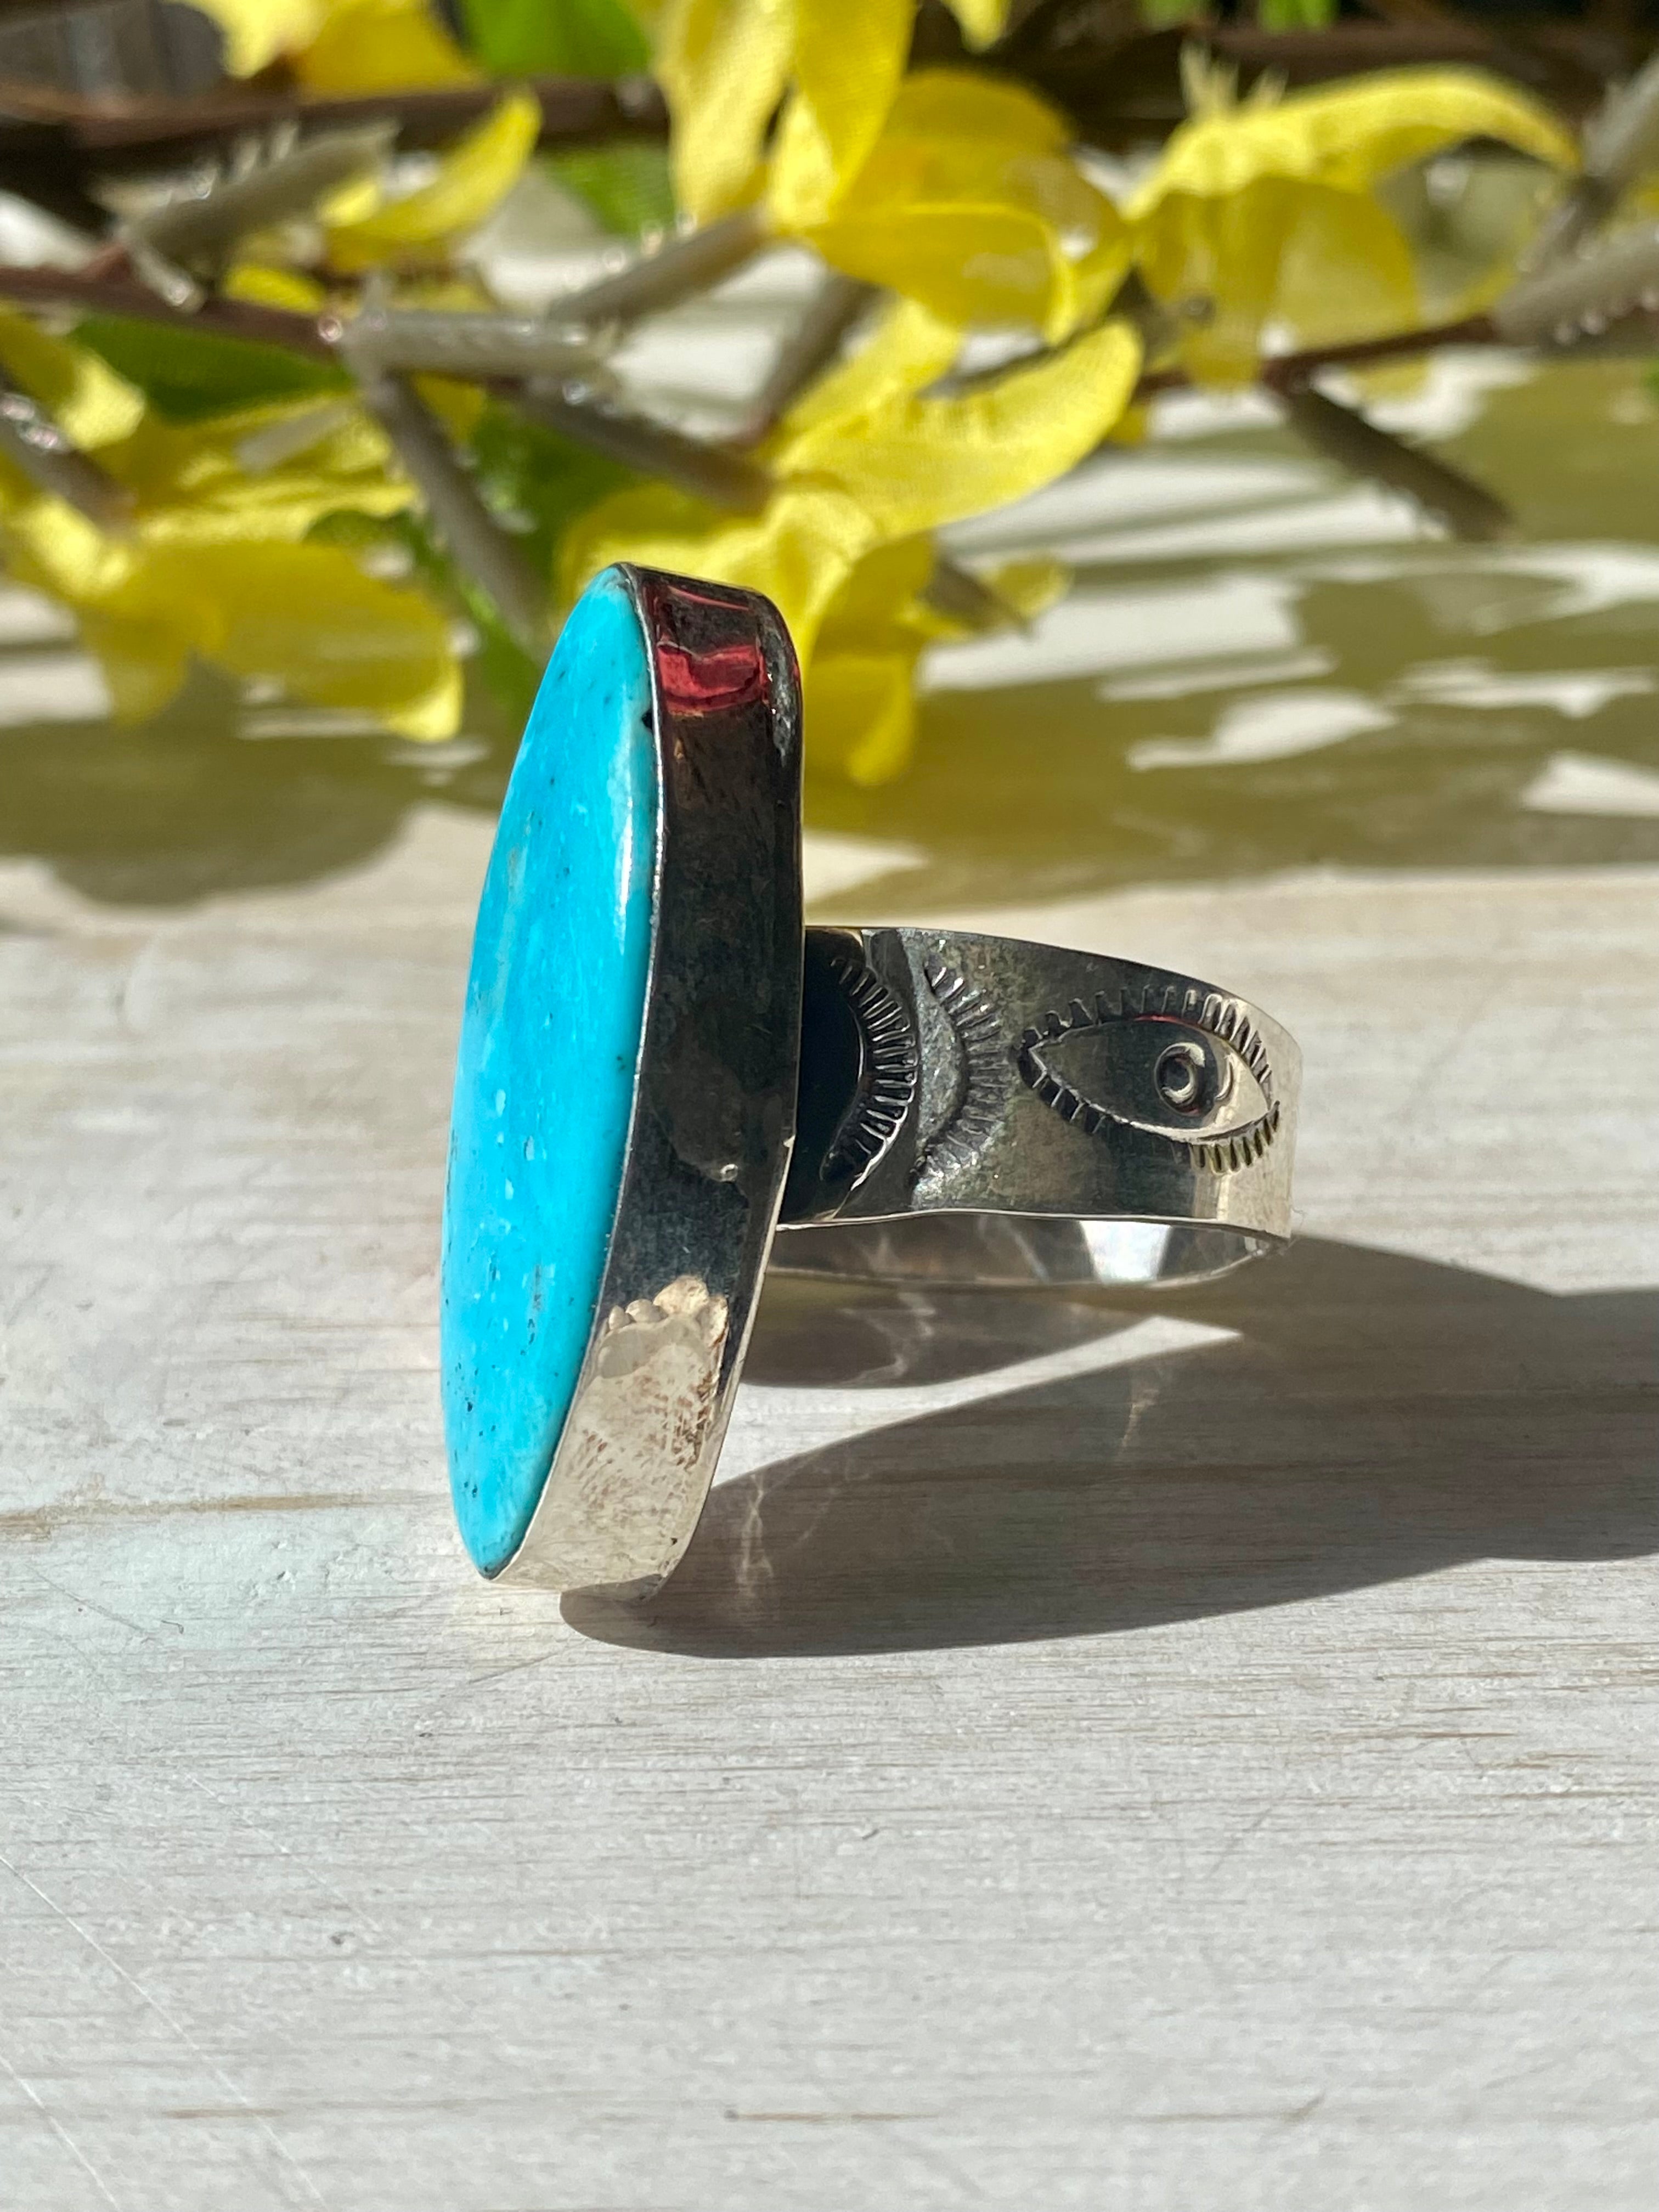 Jeffery Nelson Kingman Turquoise & Spiny Oyster Sterling Silver Ring Size Adjustable